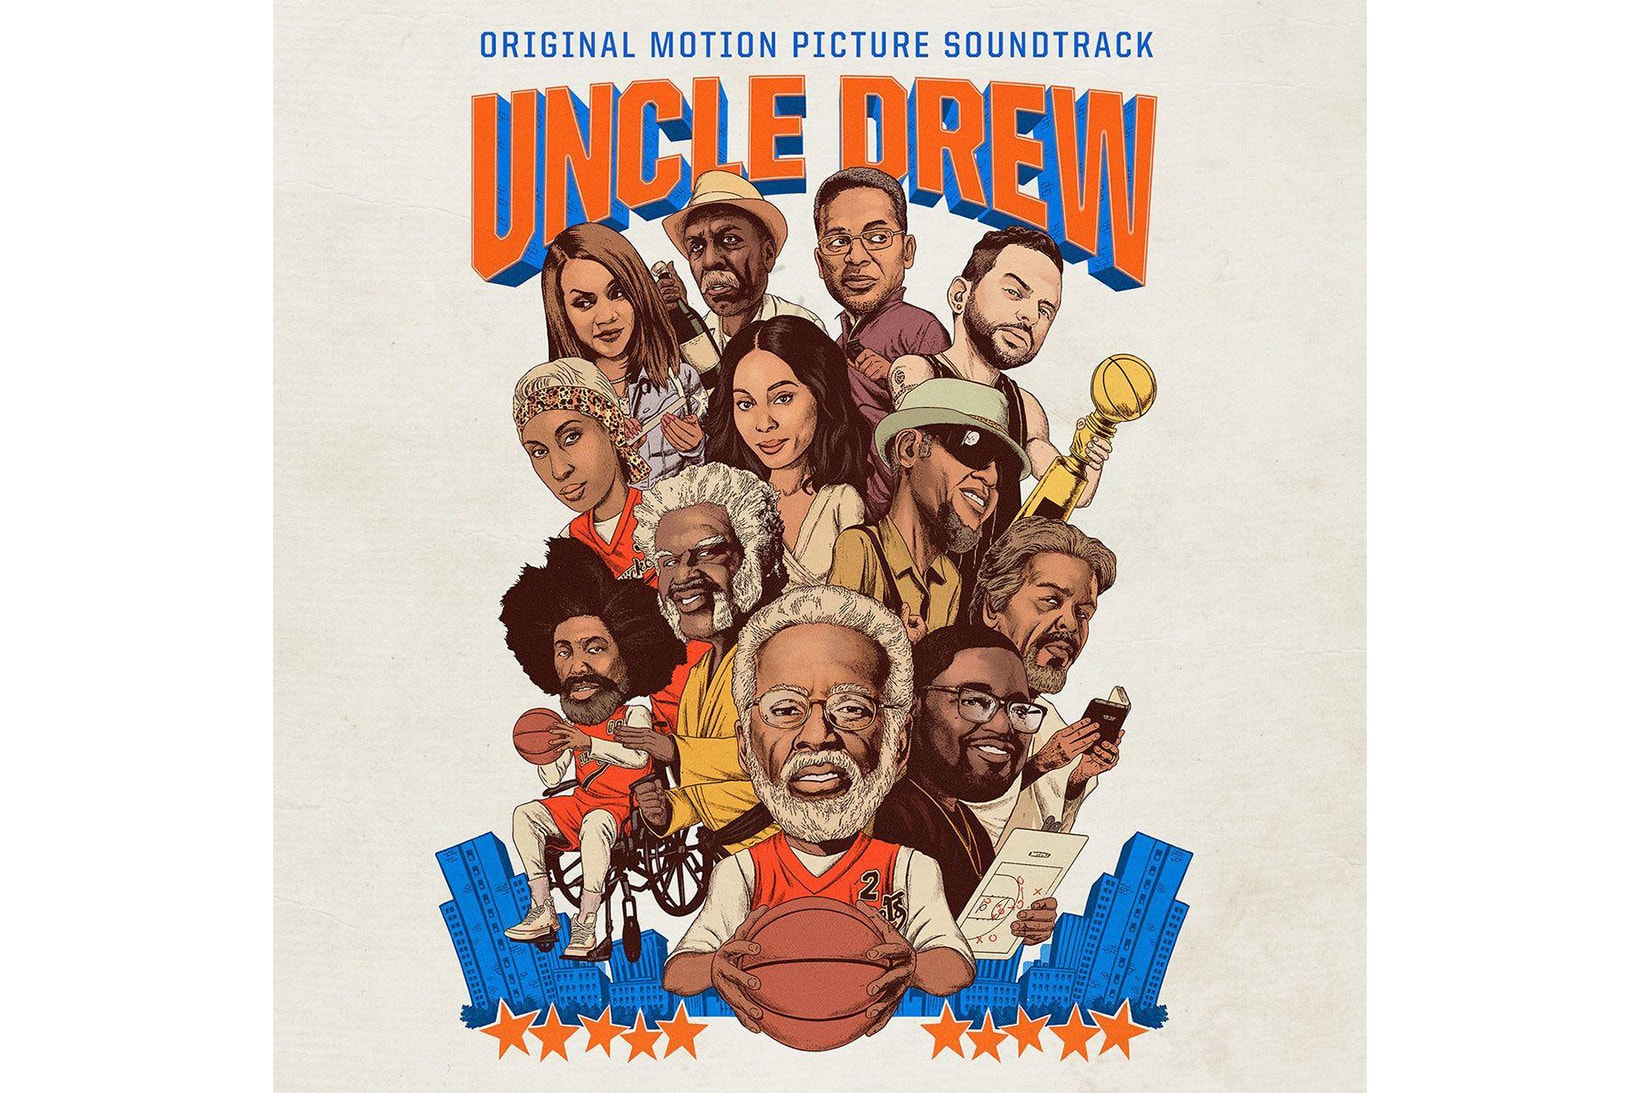 Uncle Drew Soundtrack Stream kyrie irving movie june 15 2018 release date info drop debut premiere spotify apple music